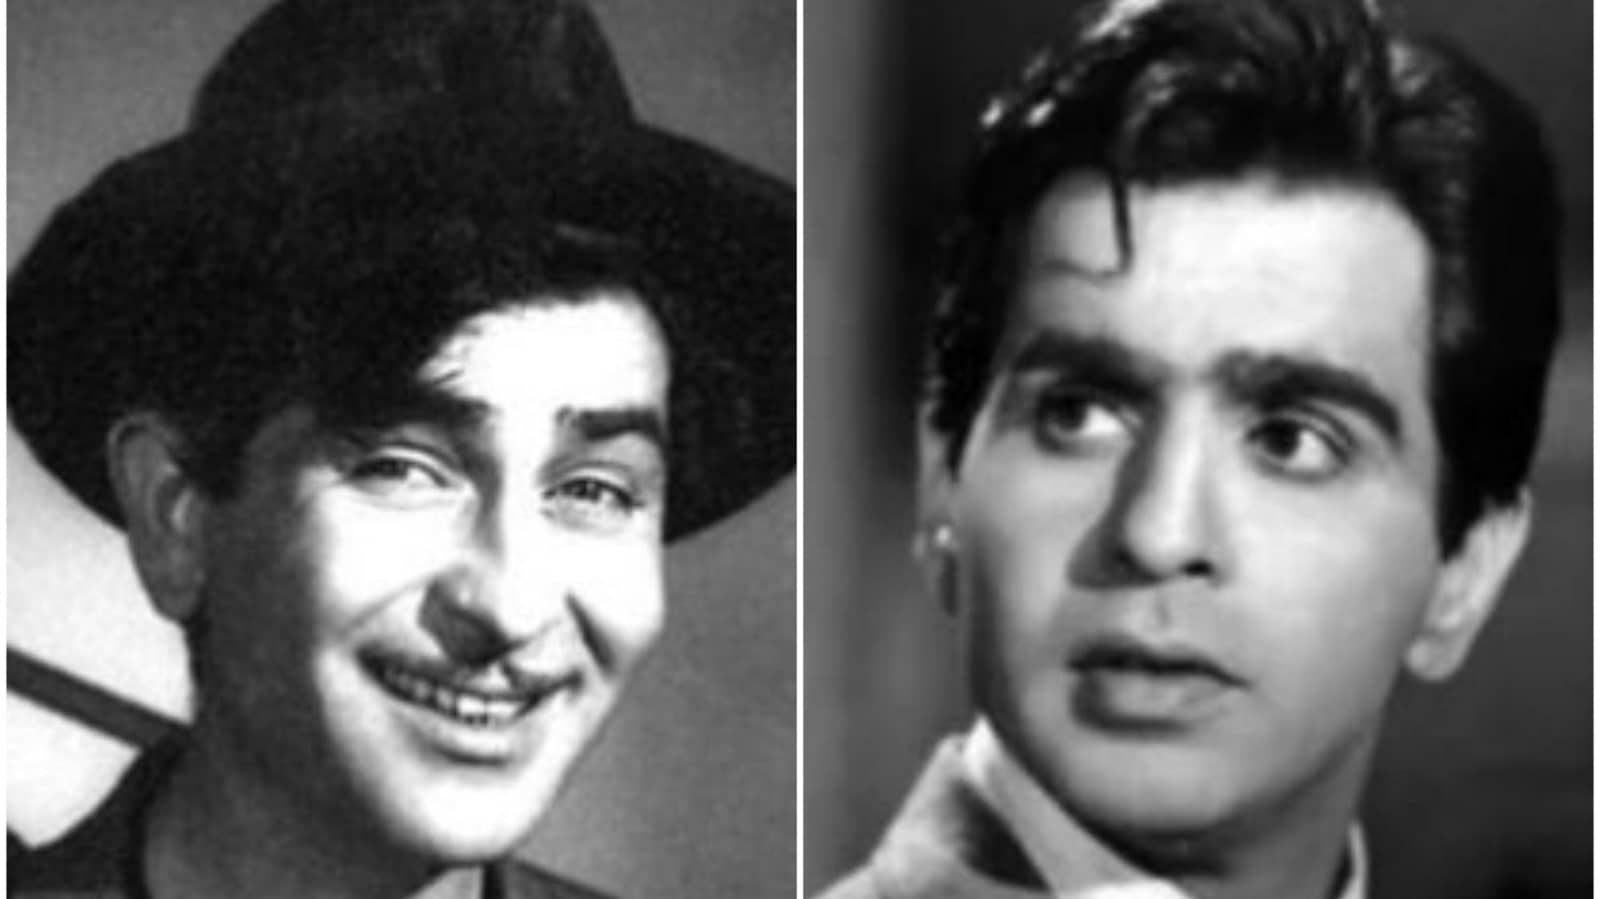 Incredible Compilation of Over 999 Raj Kapoor Images - Full 4K Resolution